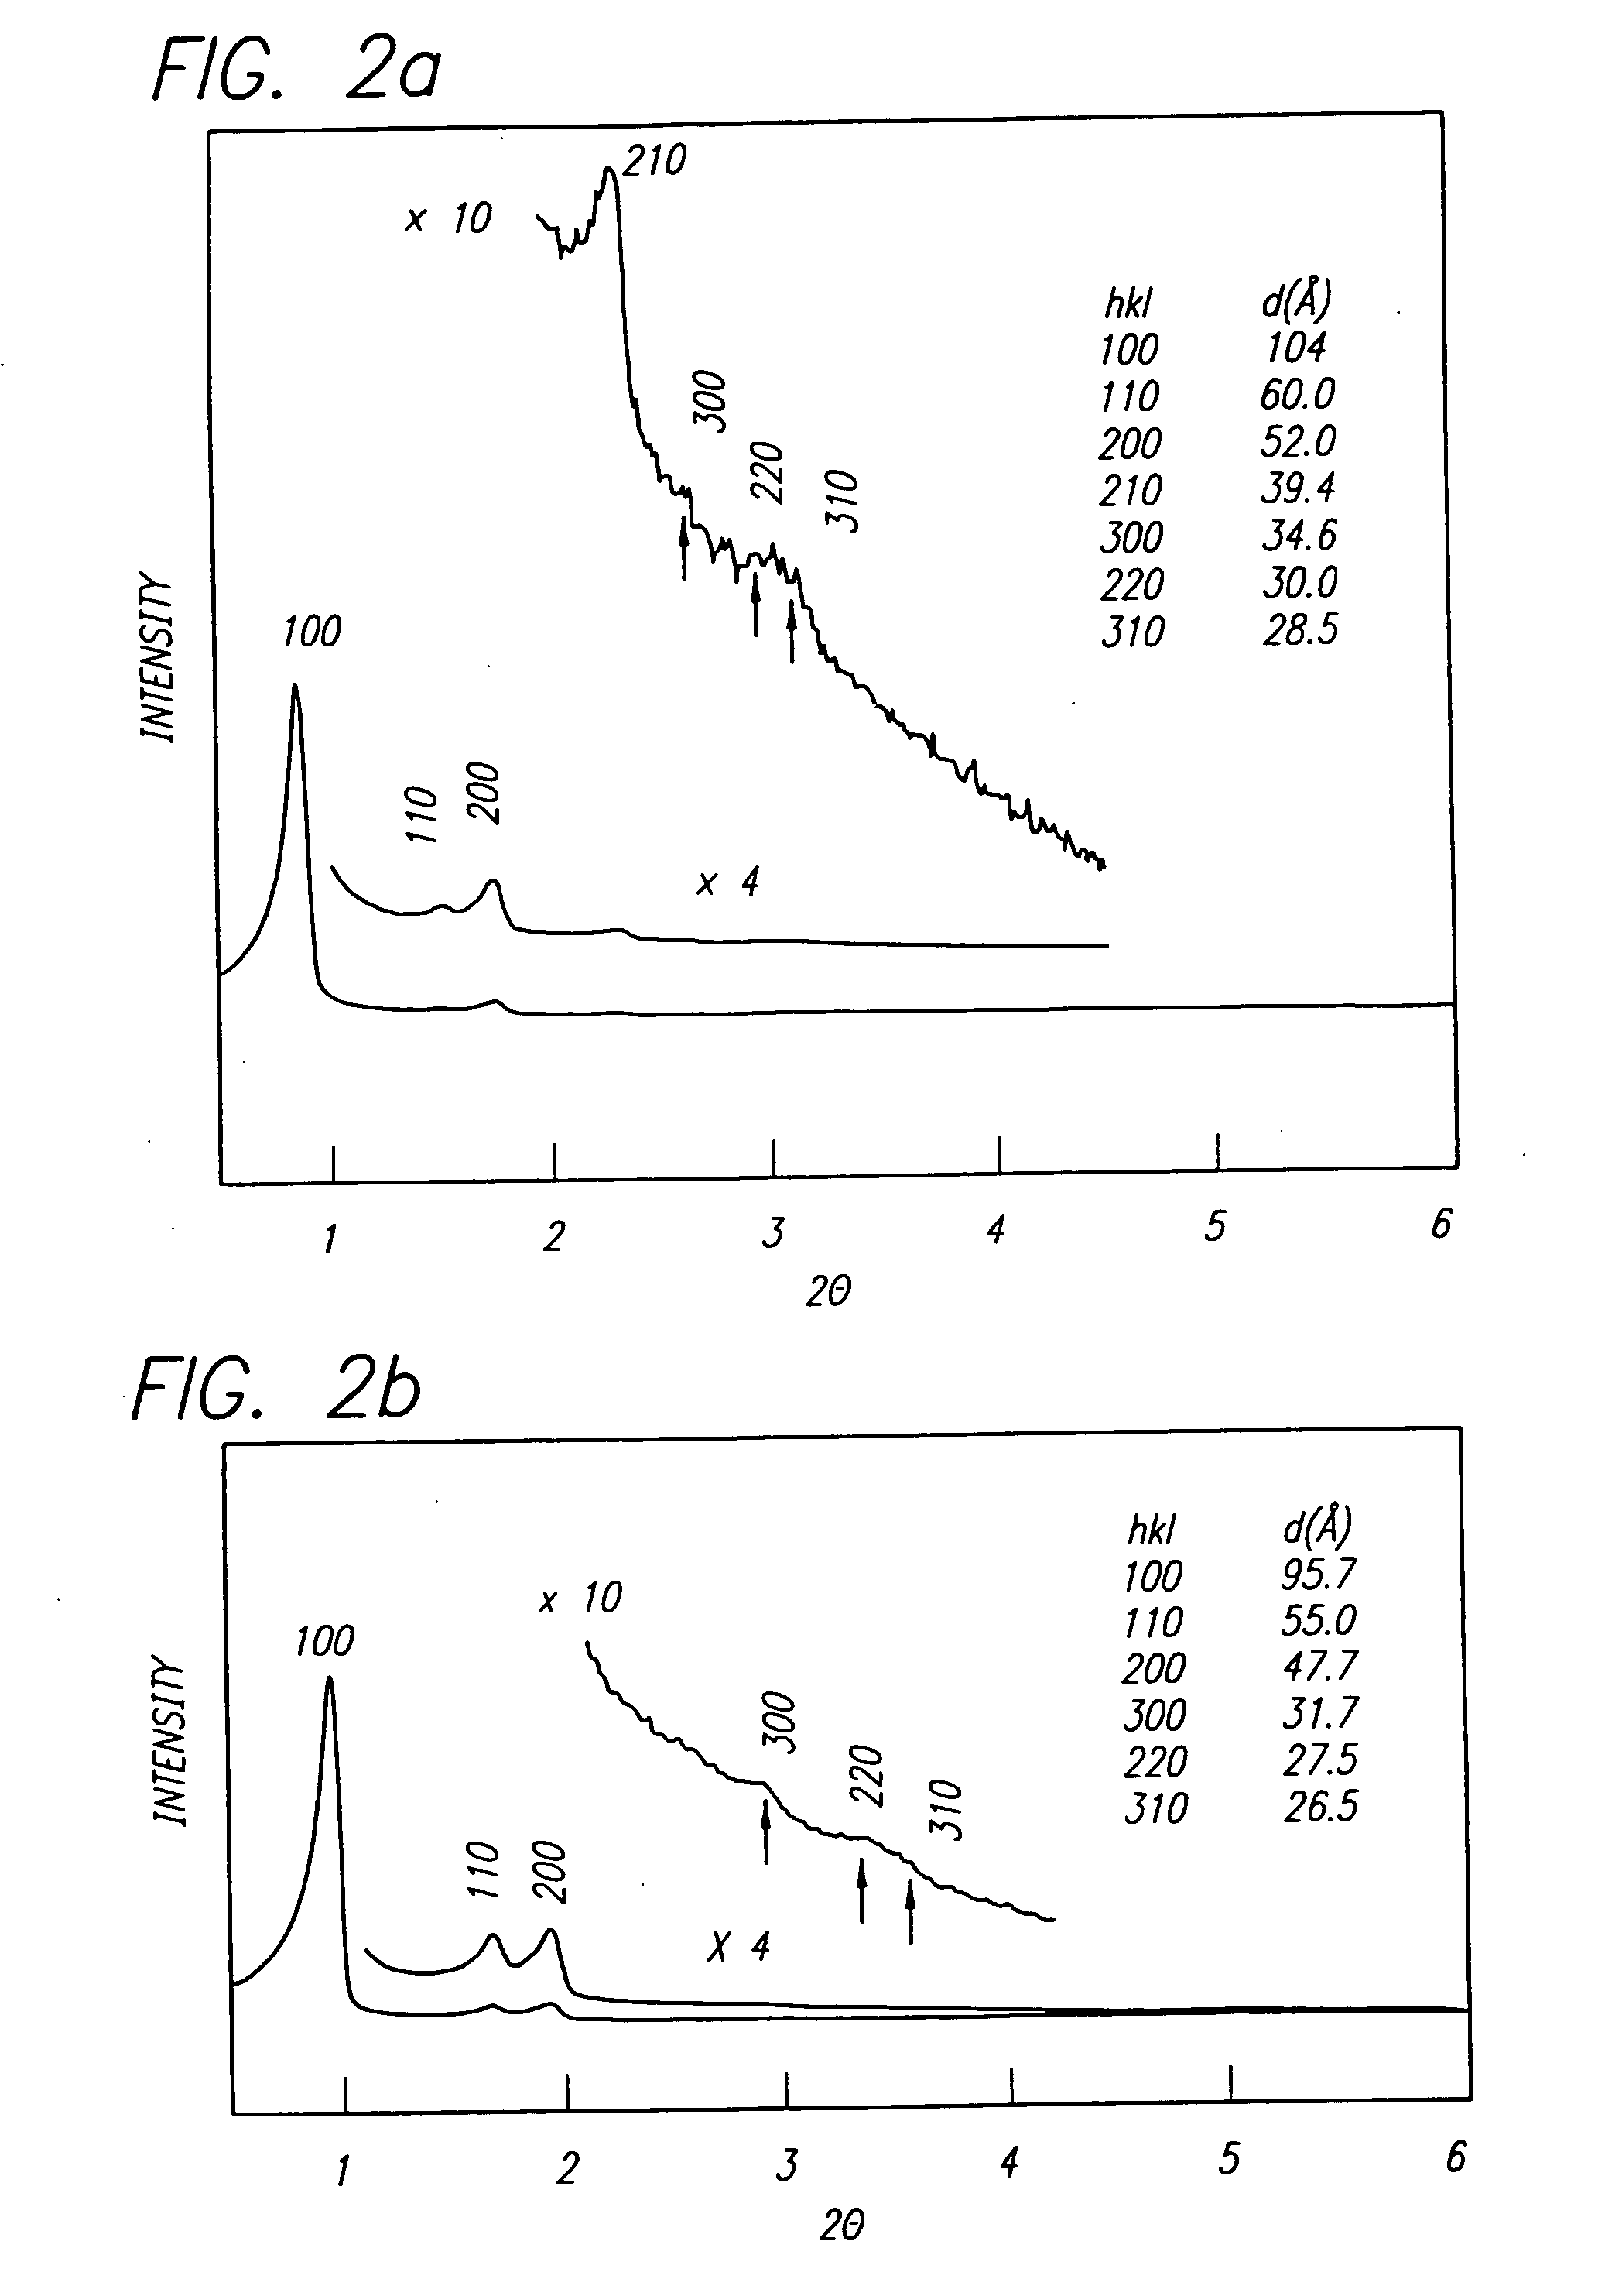 Block polymer processing for mesostructured inorganic oxide materials